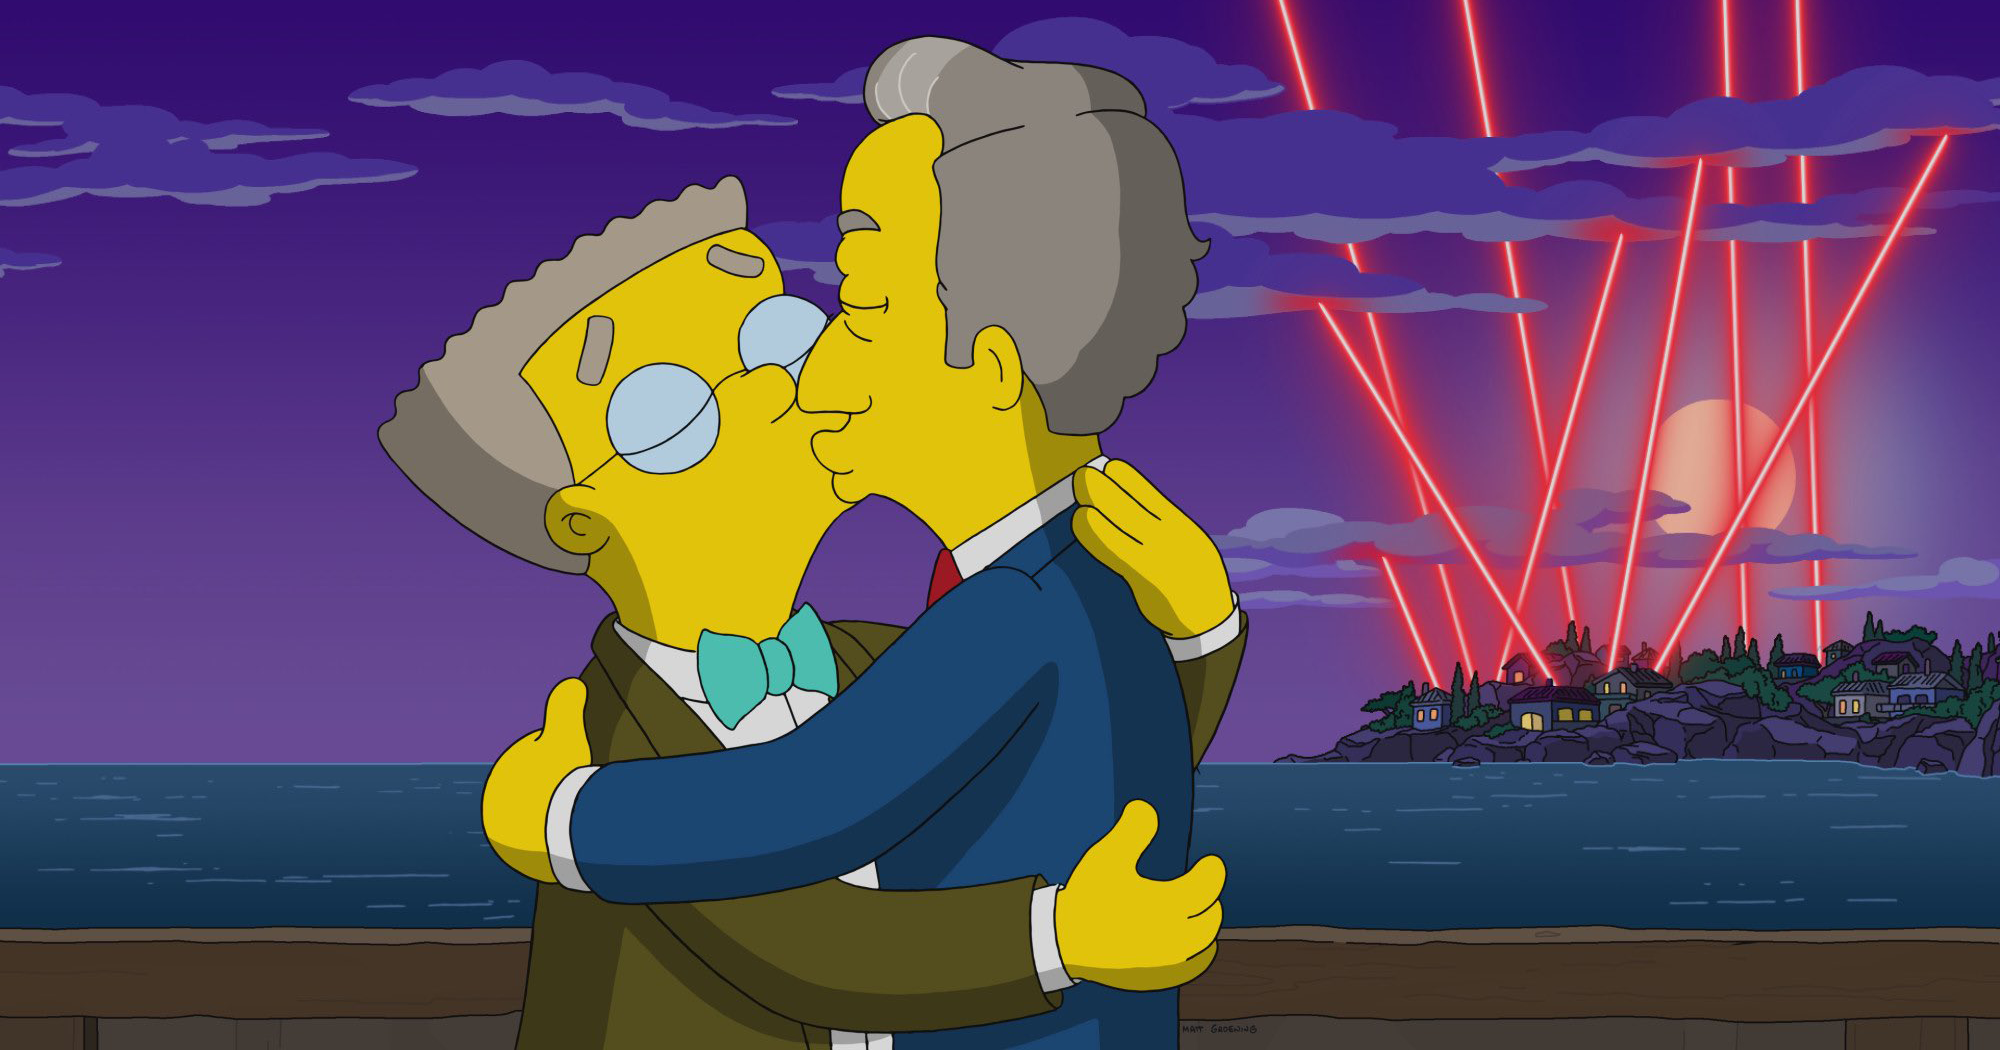 The Simpsons characters Waylon Smithers and Michael De Graff kiss.